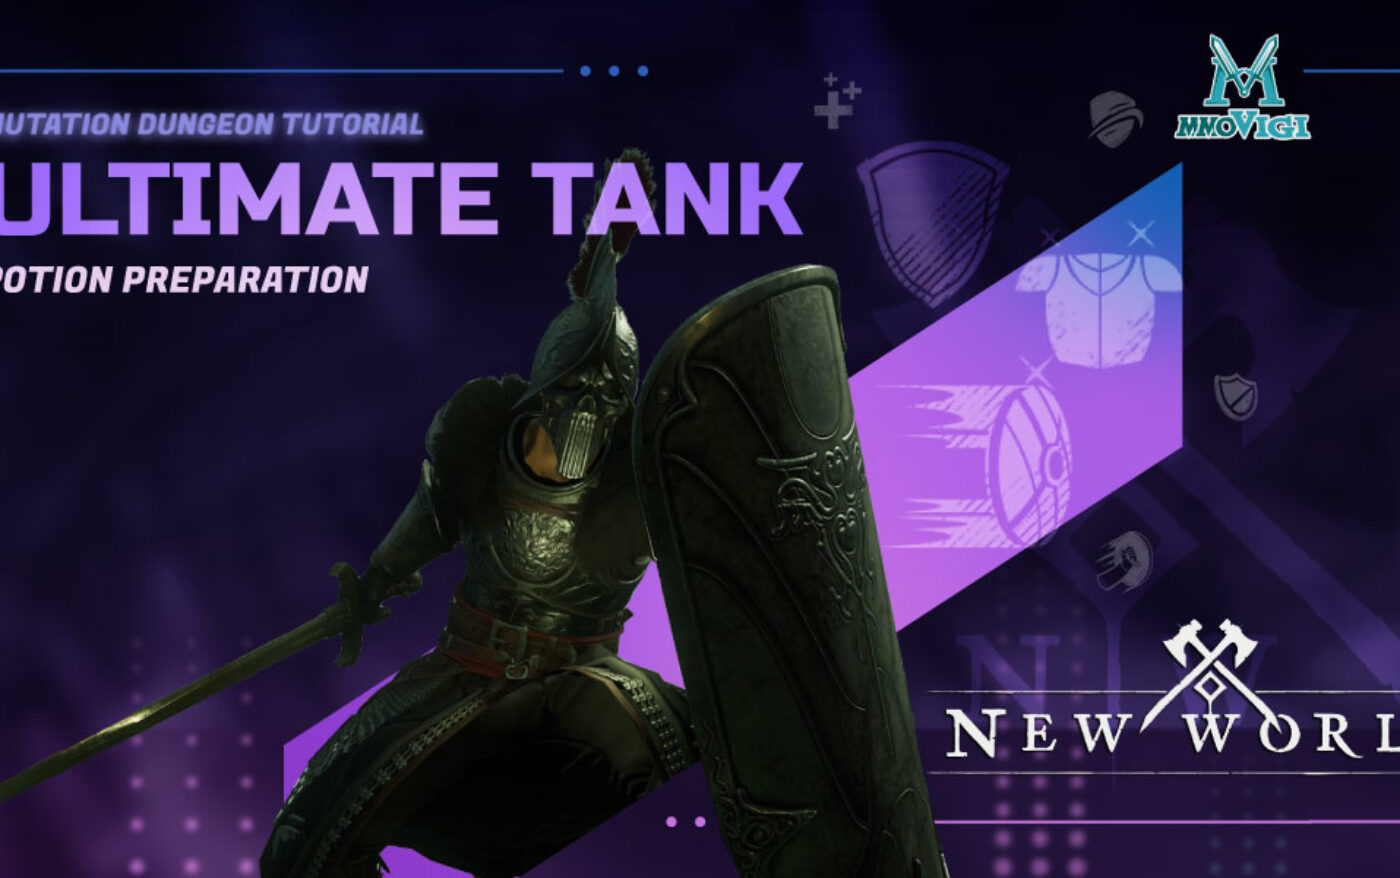 Check Out This Tank Mutation Dungeon New World Guide!